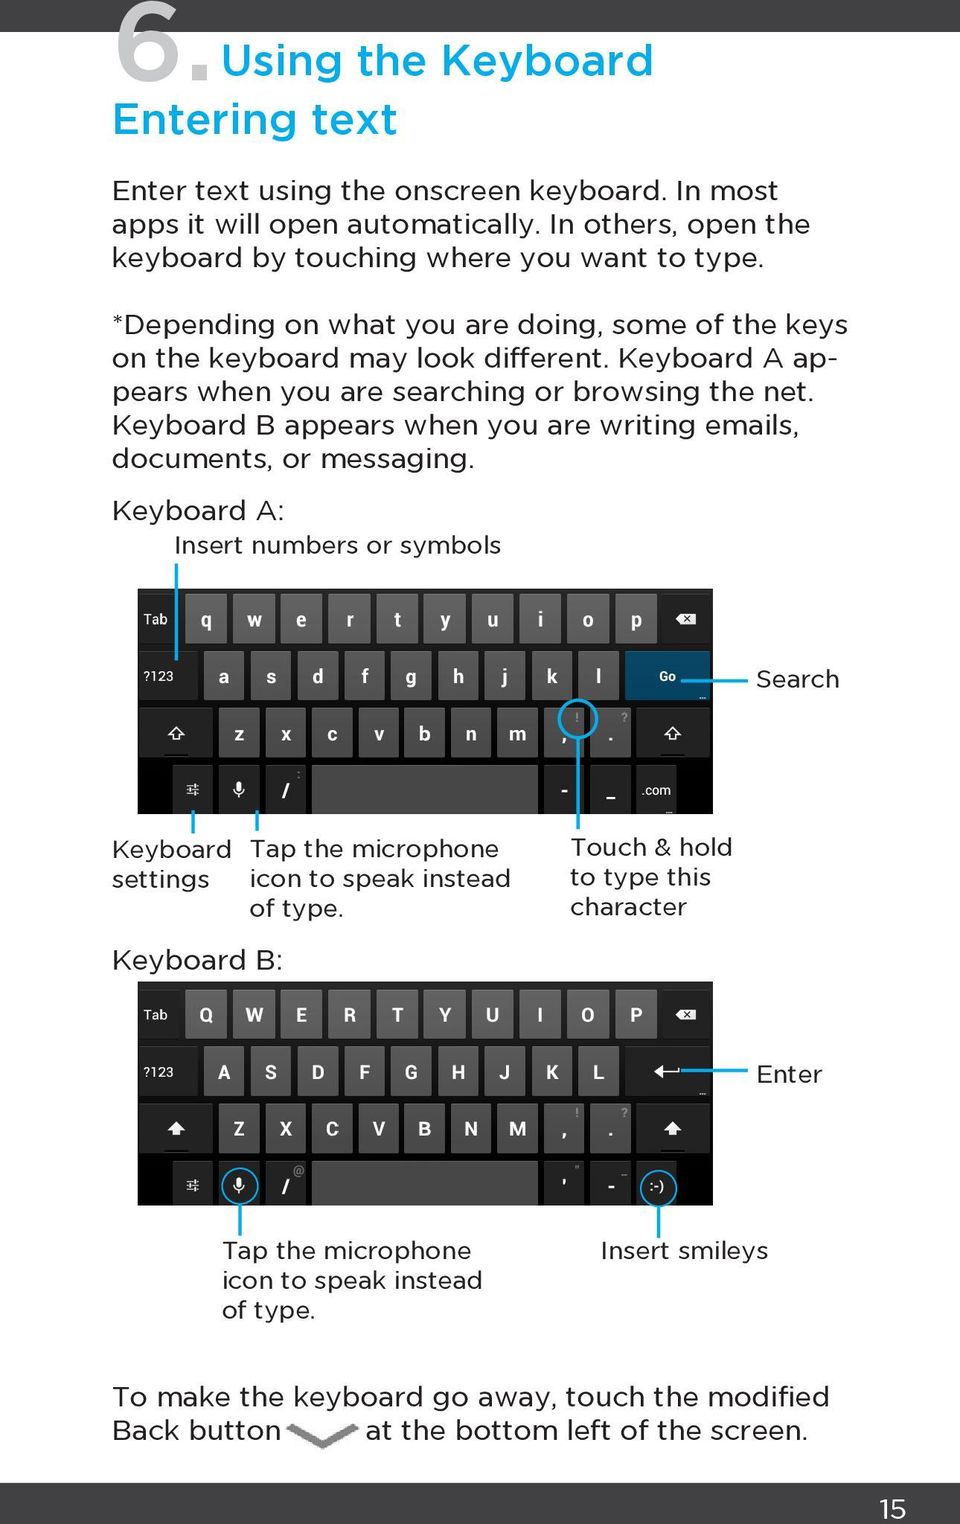 Keyboard B appears when you are writing emails, documents, or messaging.